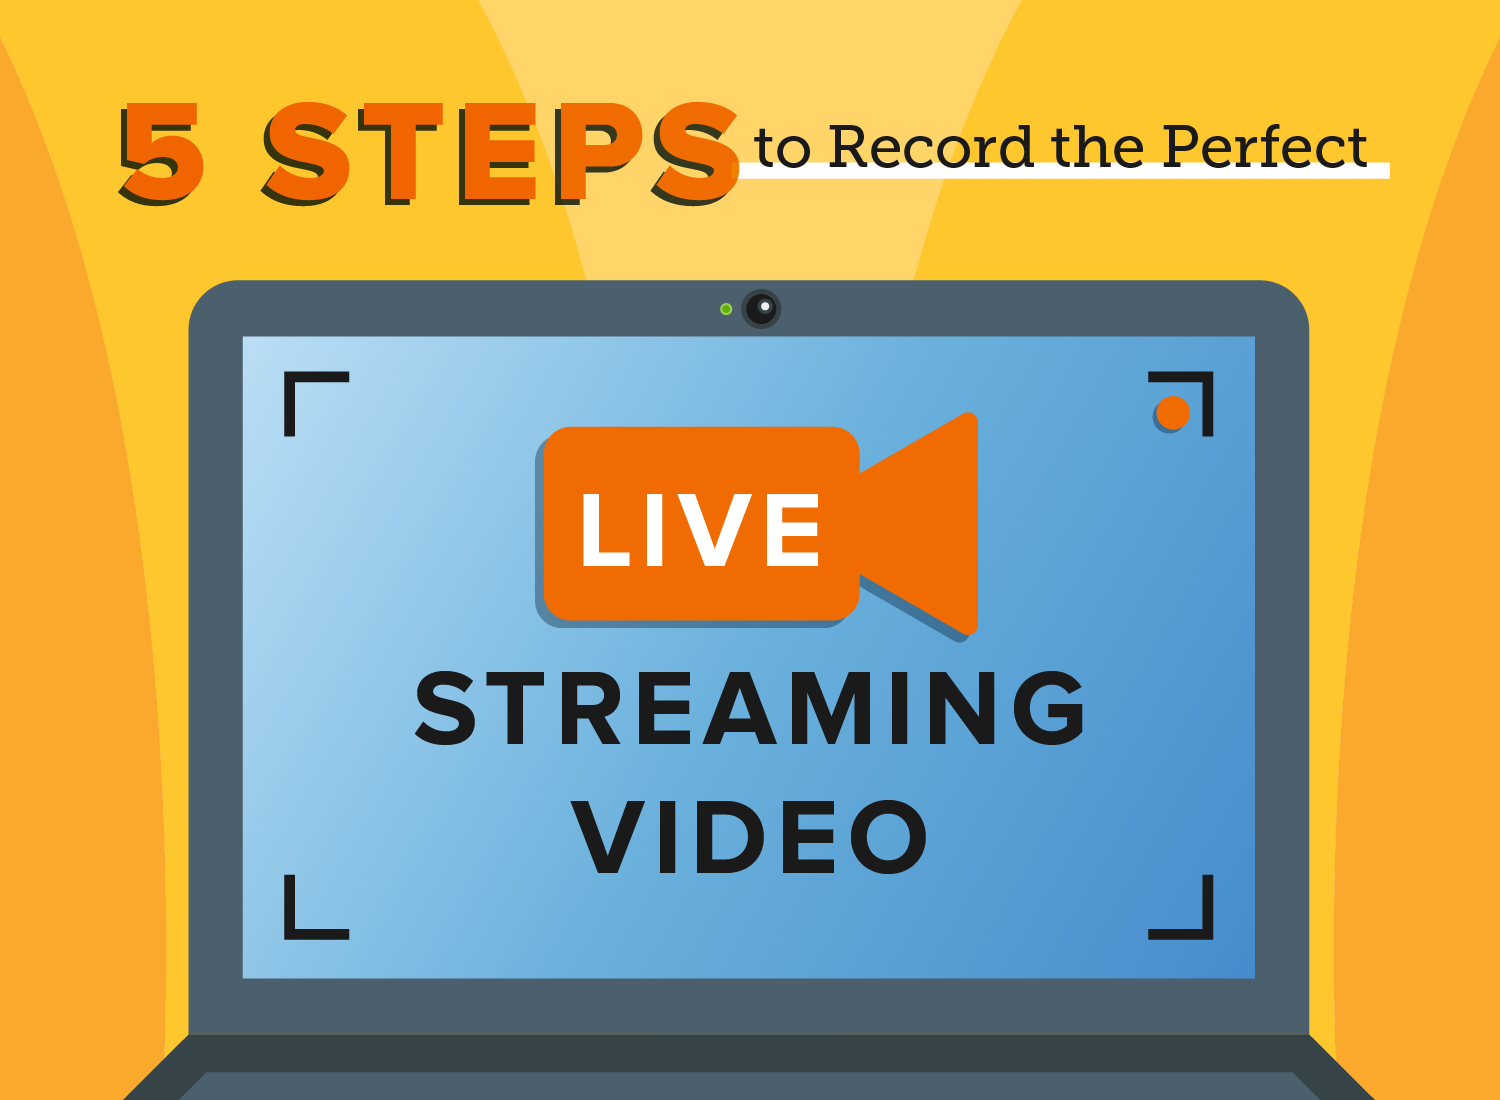 Italian regain Red 5 Steps to Record the Perfect Live Streaming Video | The TechSmith Blog